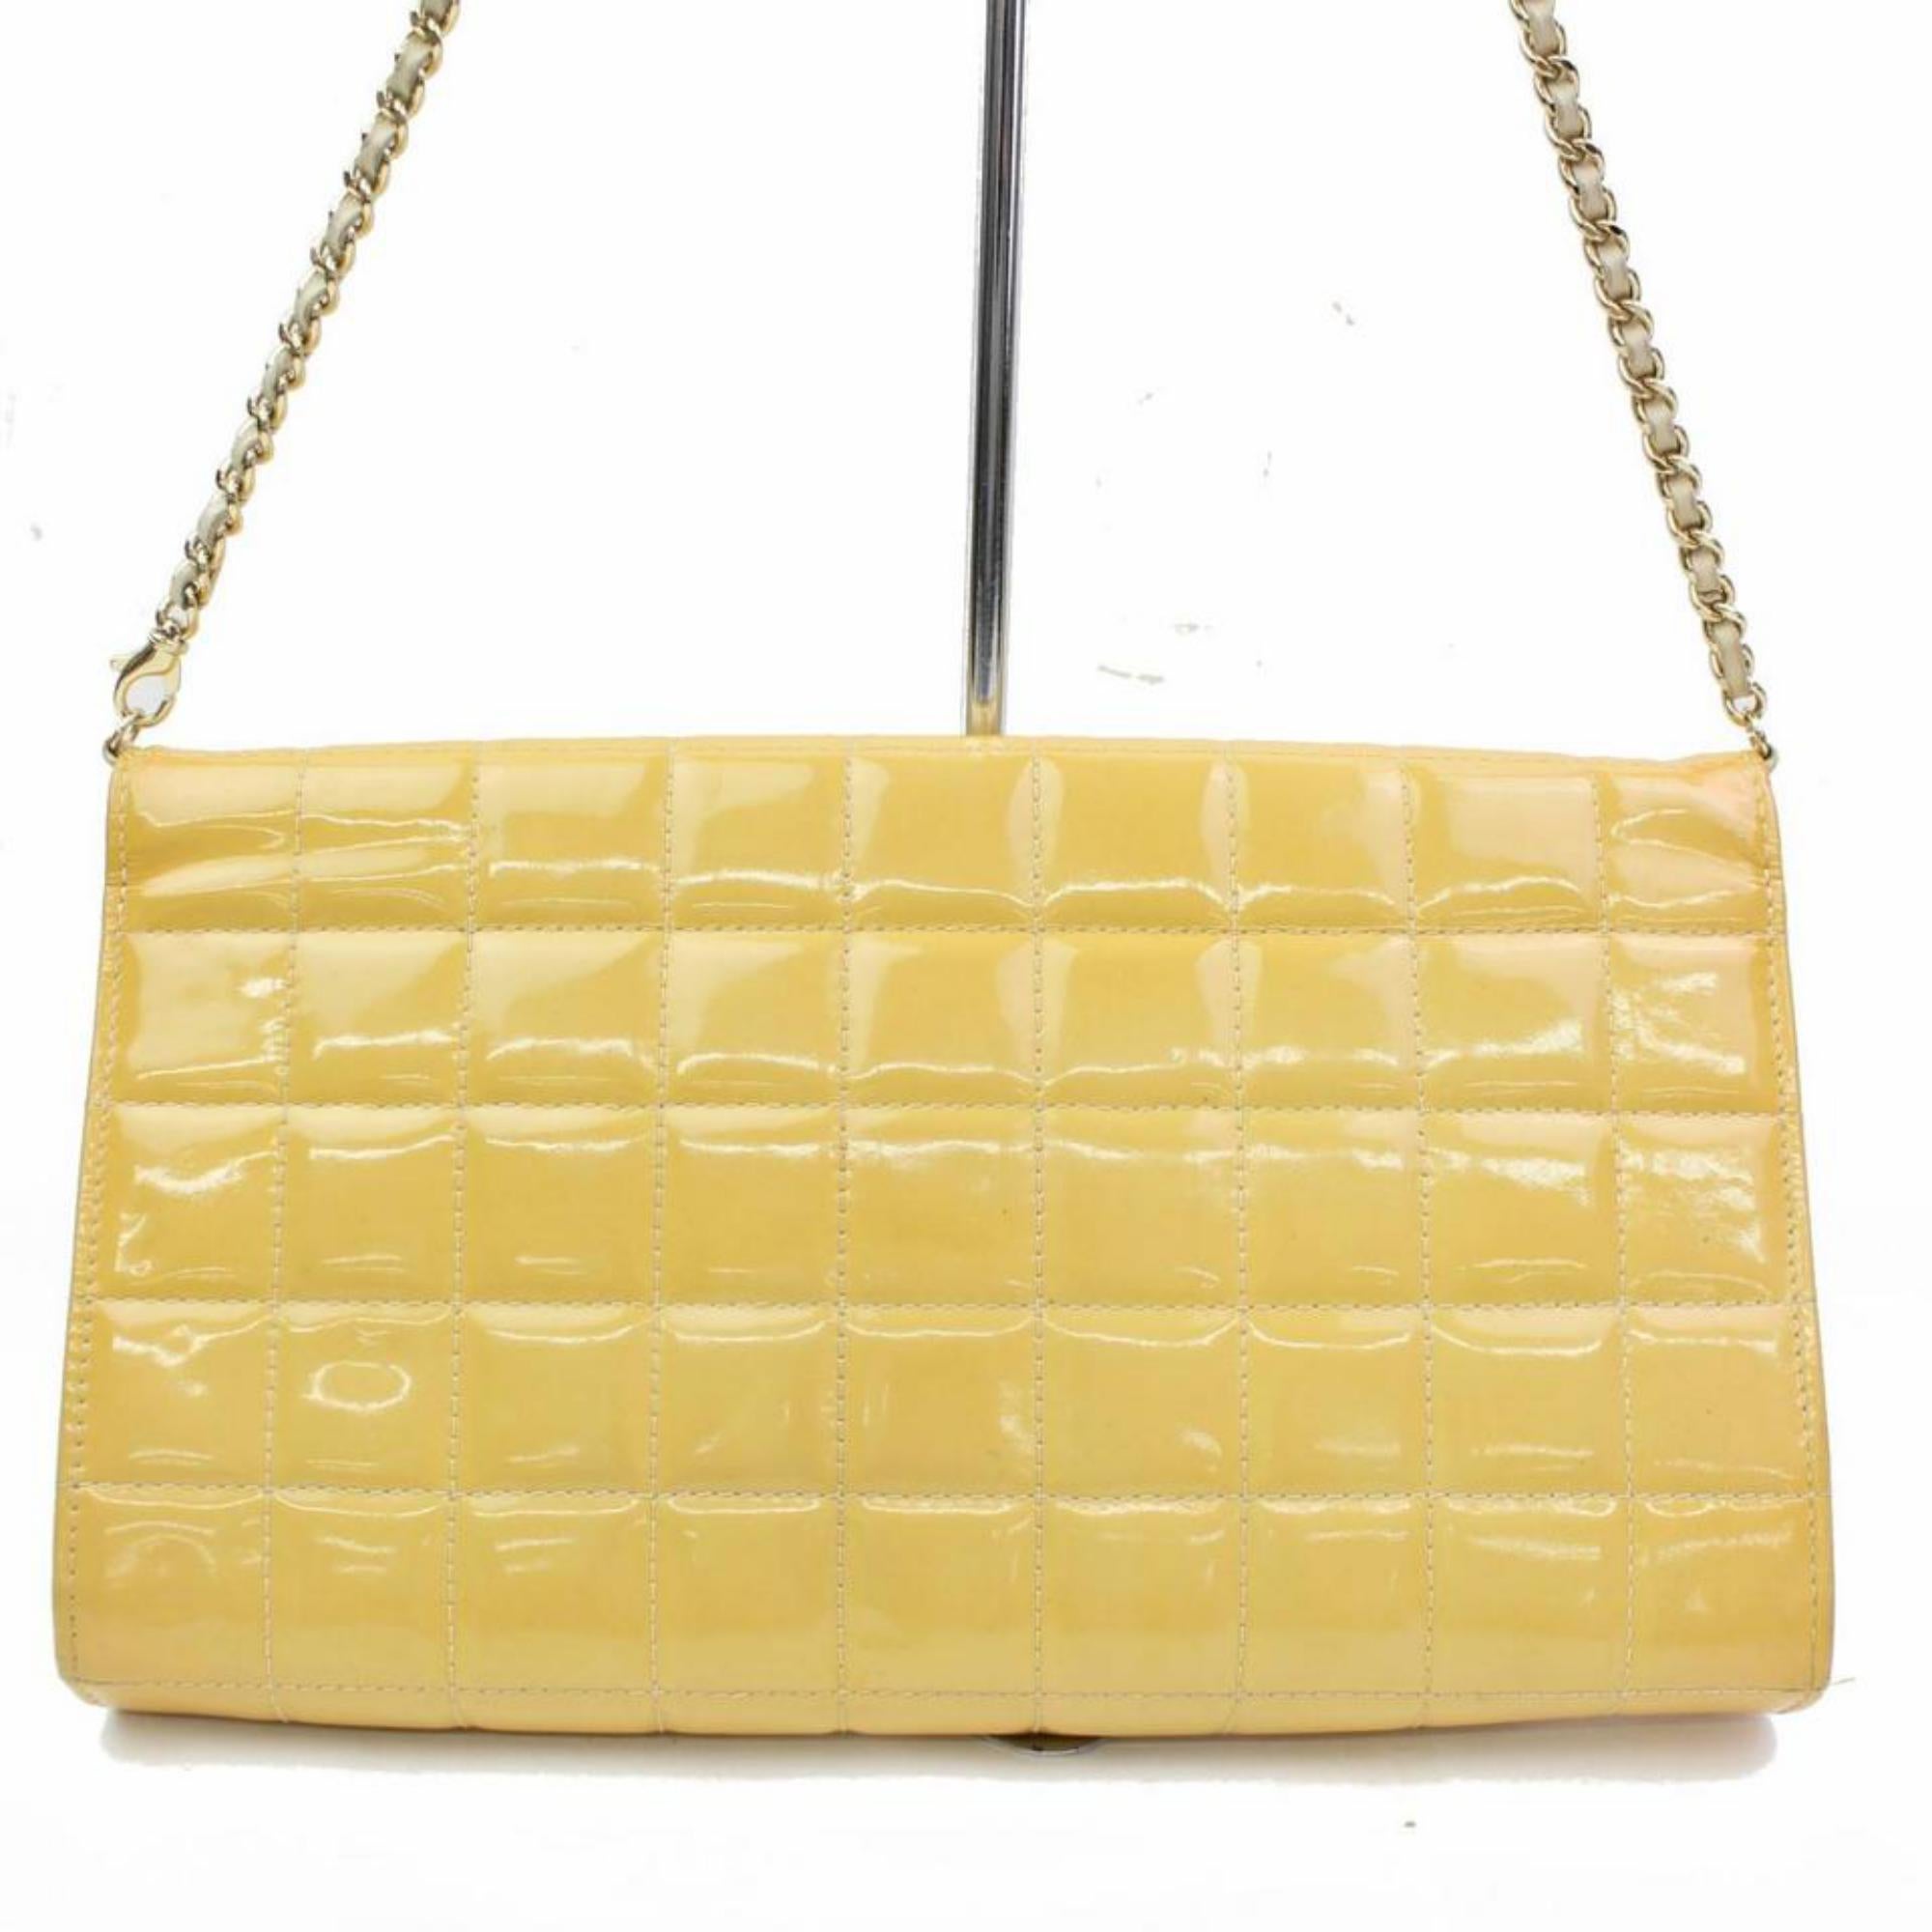 Chanel East West Quilted Flap 866712 Yellow Patent Leather Shoulder Bag For Sale 2